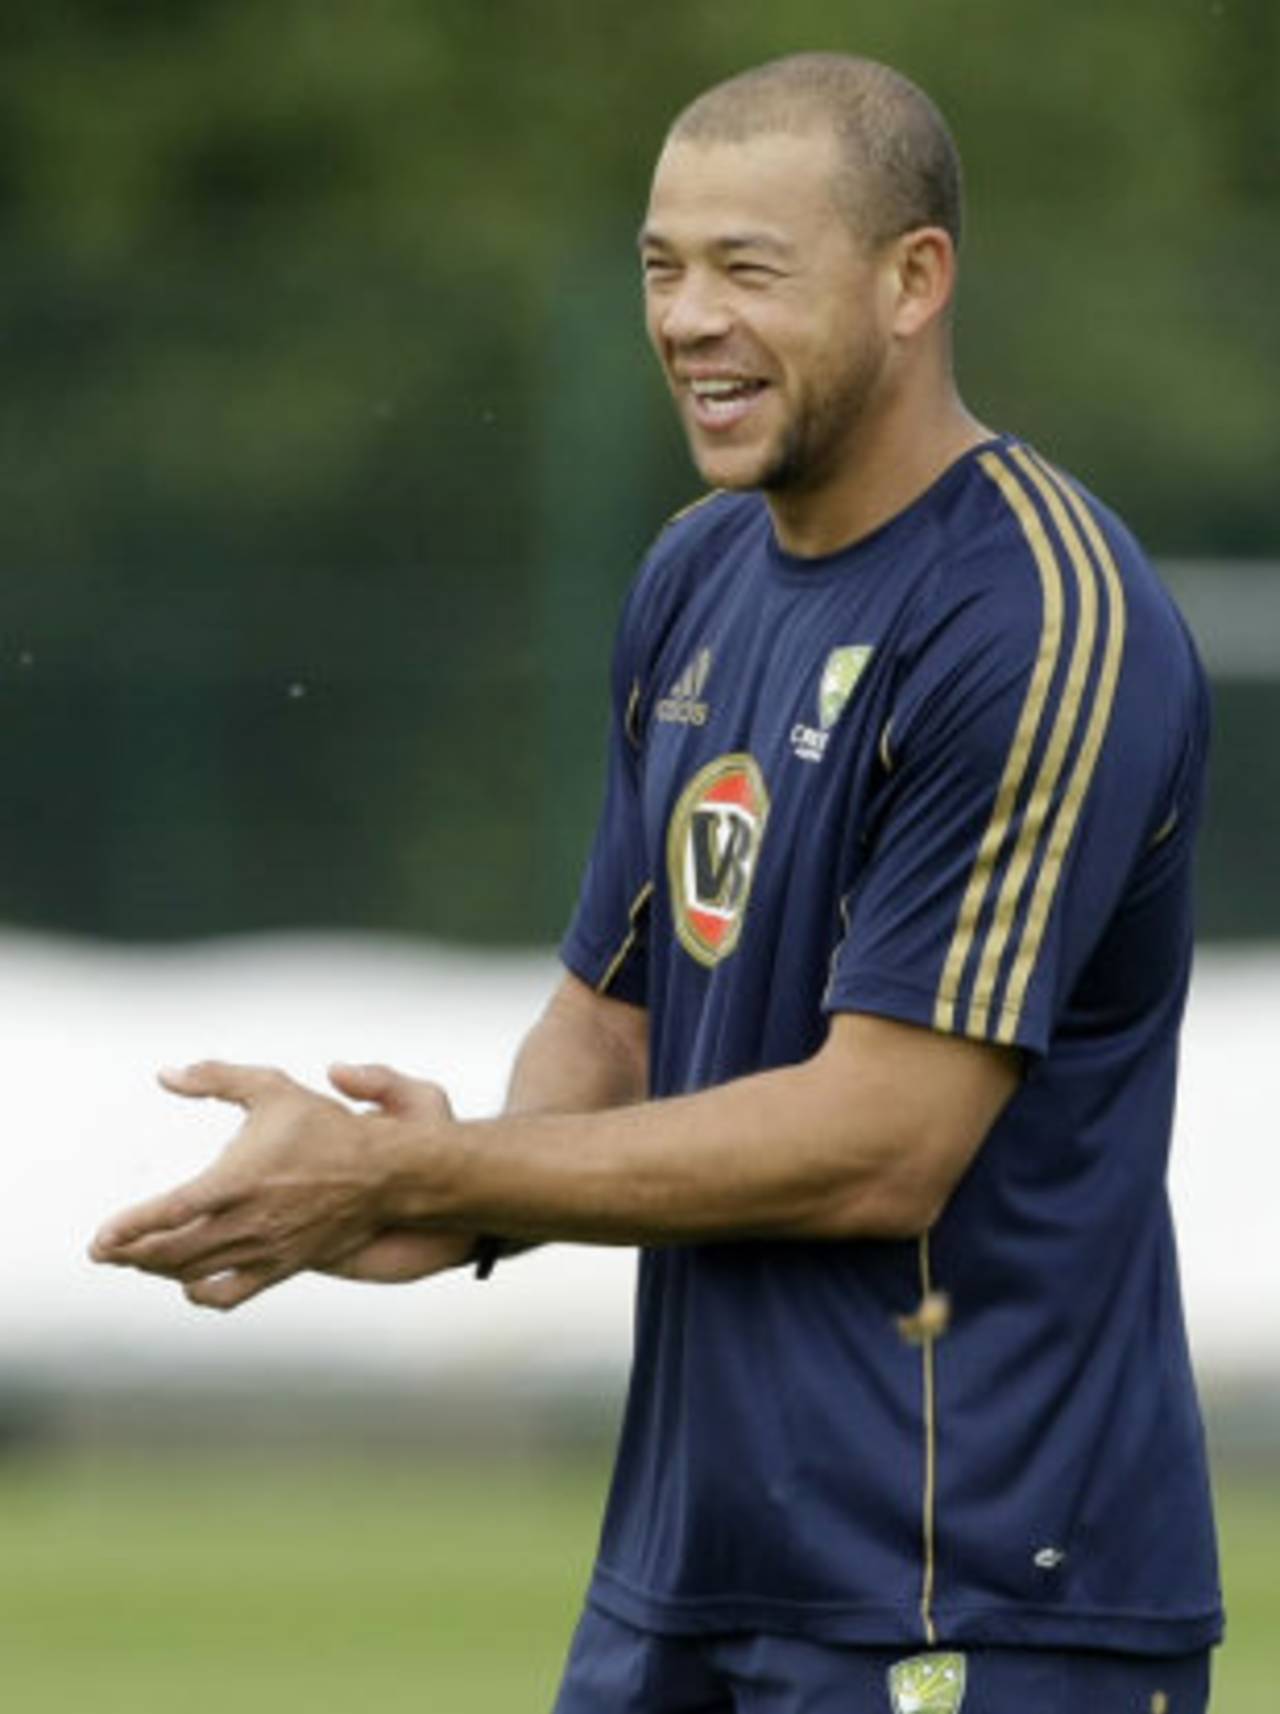 A happy Andrew Symonds at a training session in Nottingham, May 29, 2009